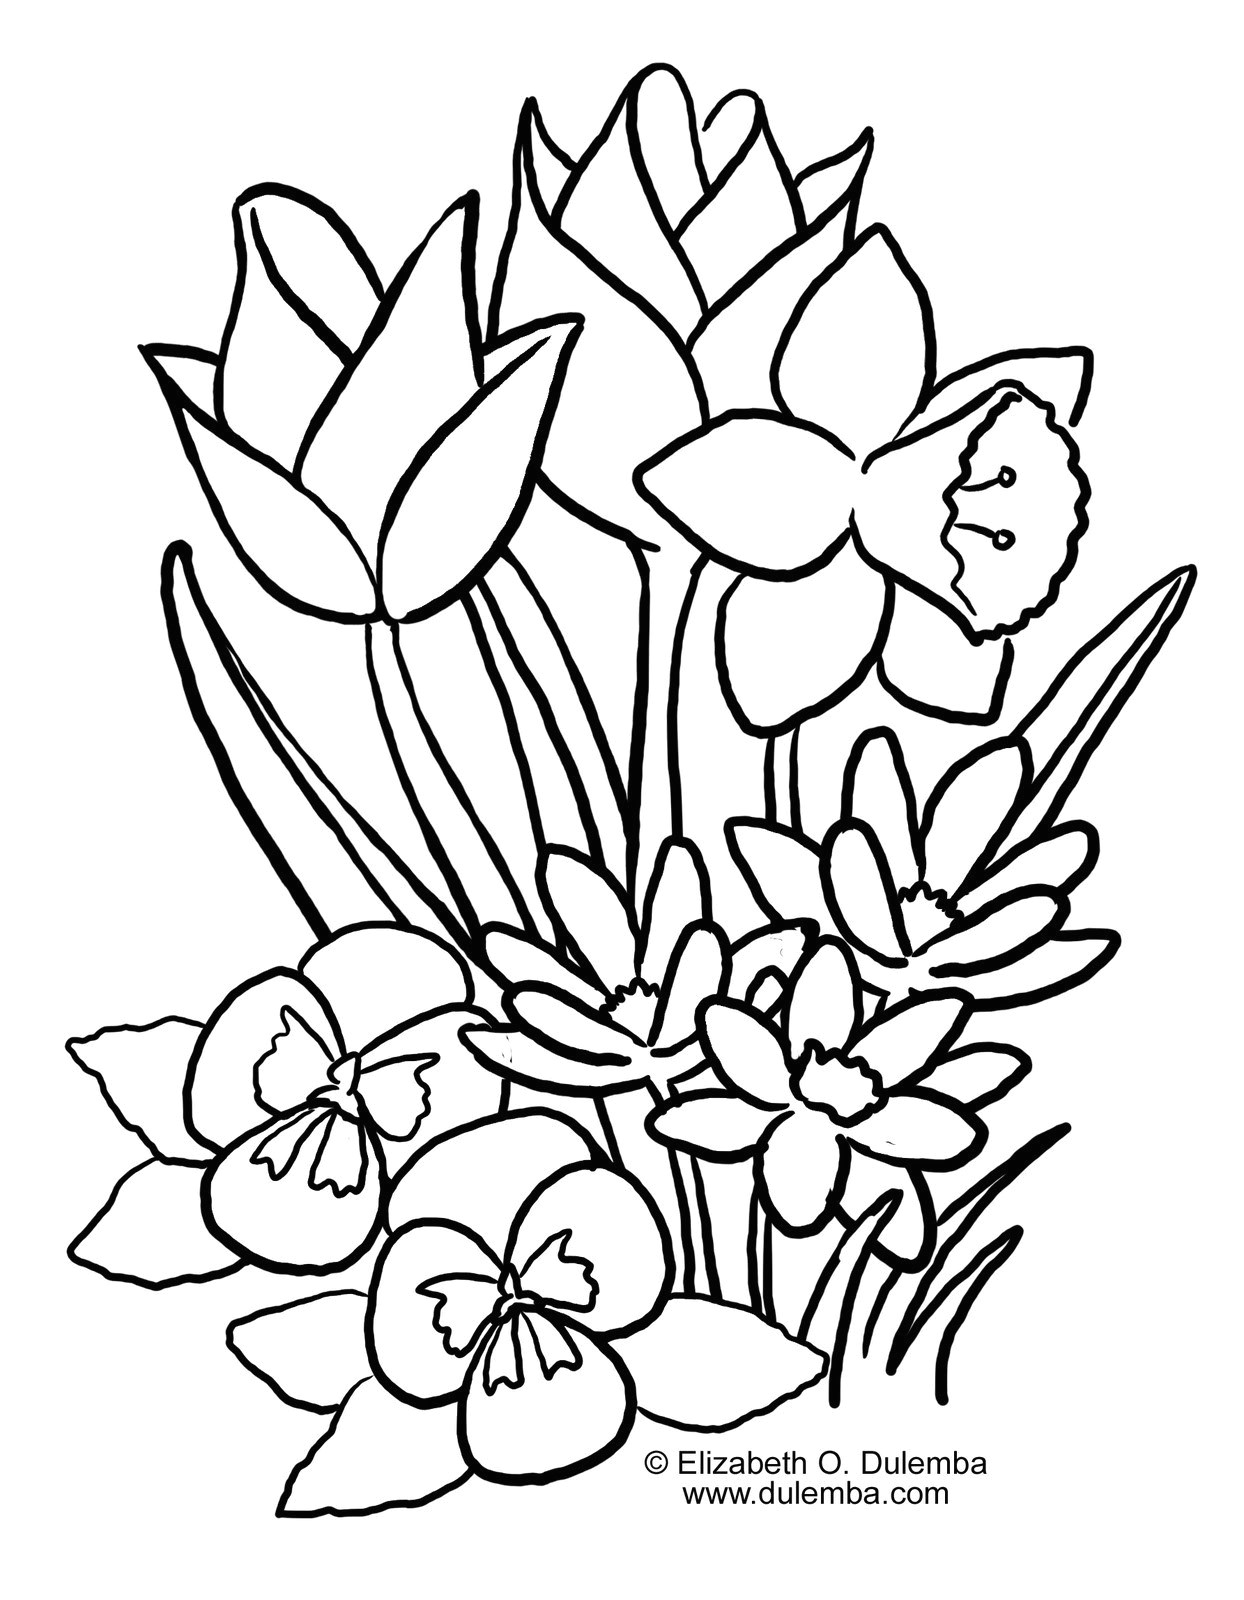 Drawing Of Spring Flowers Easy to Draw Spring Pictures Spring Flowers Coloring Pages Lovely